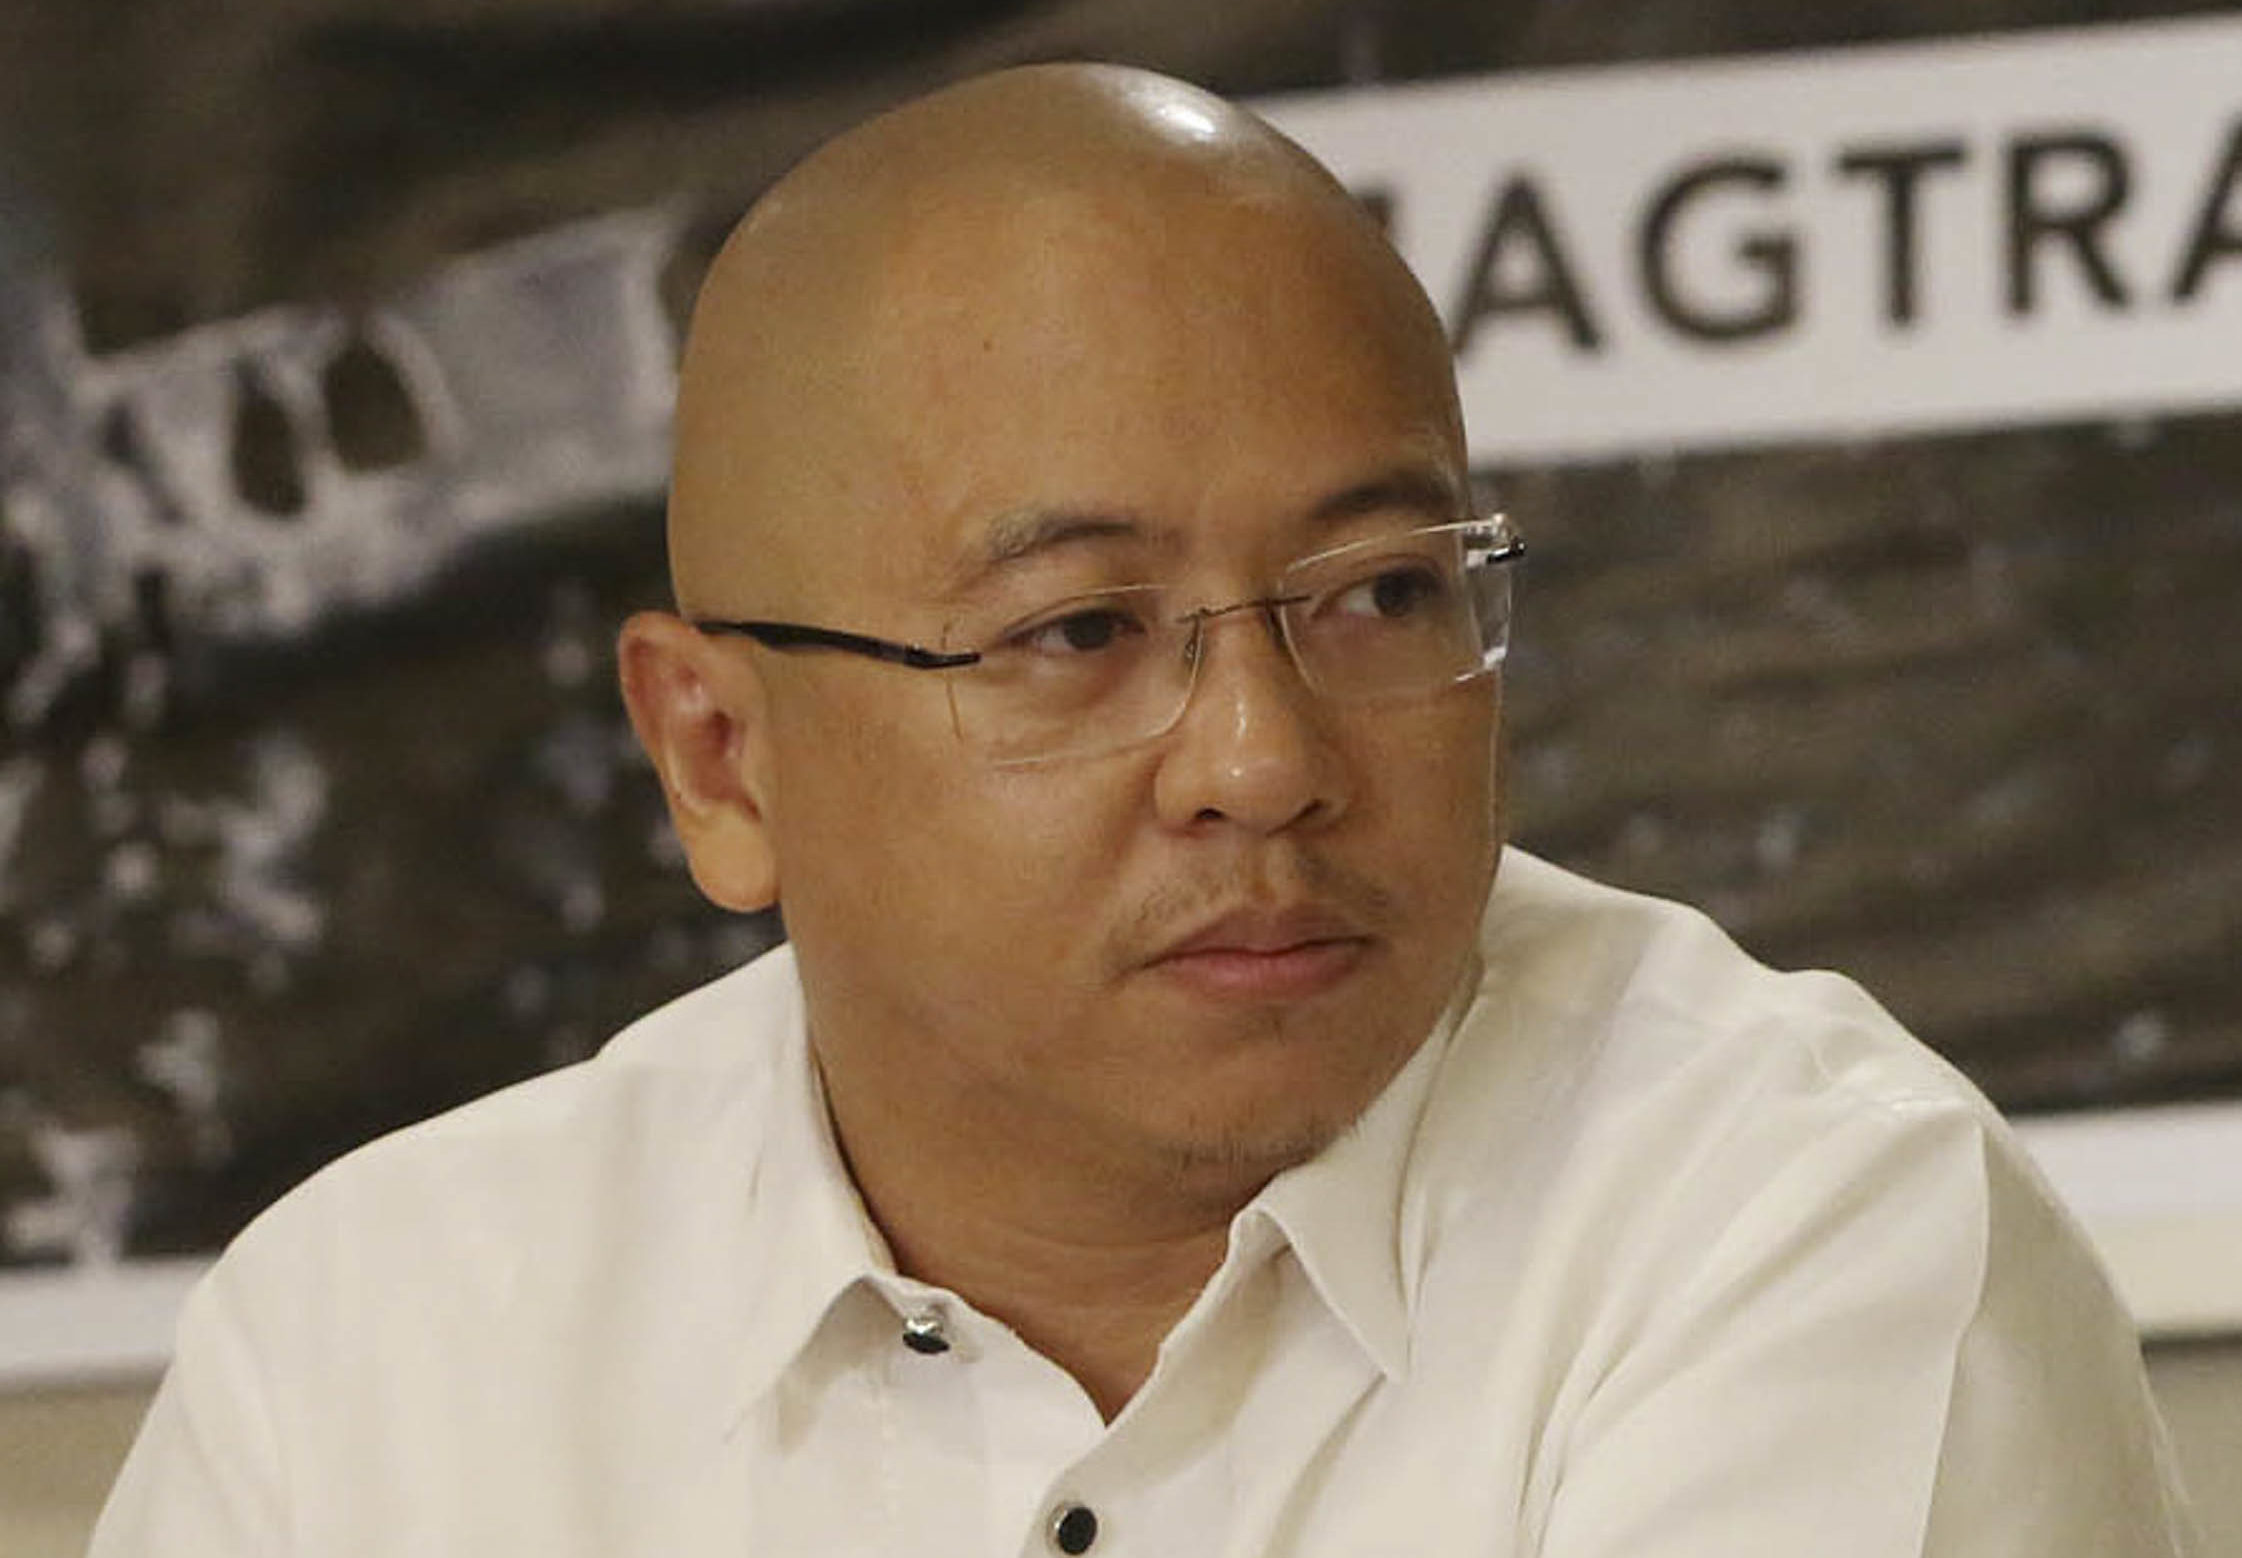 Hilbay, Diokno tell Duterte: Opposition’s role is to check admin